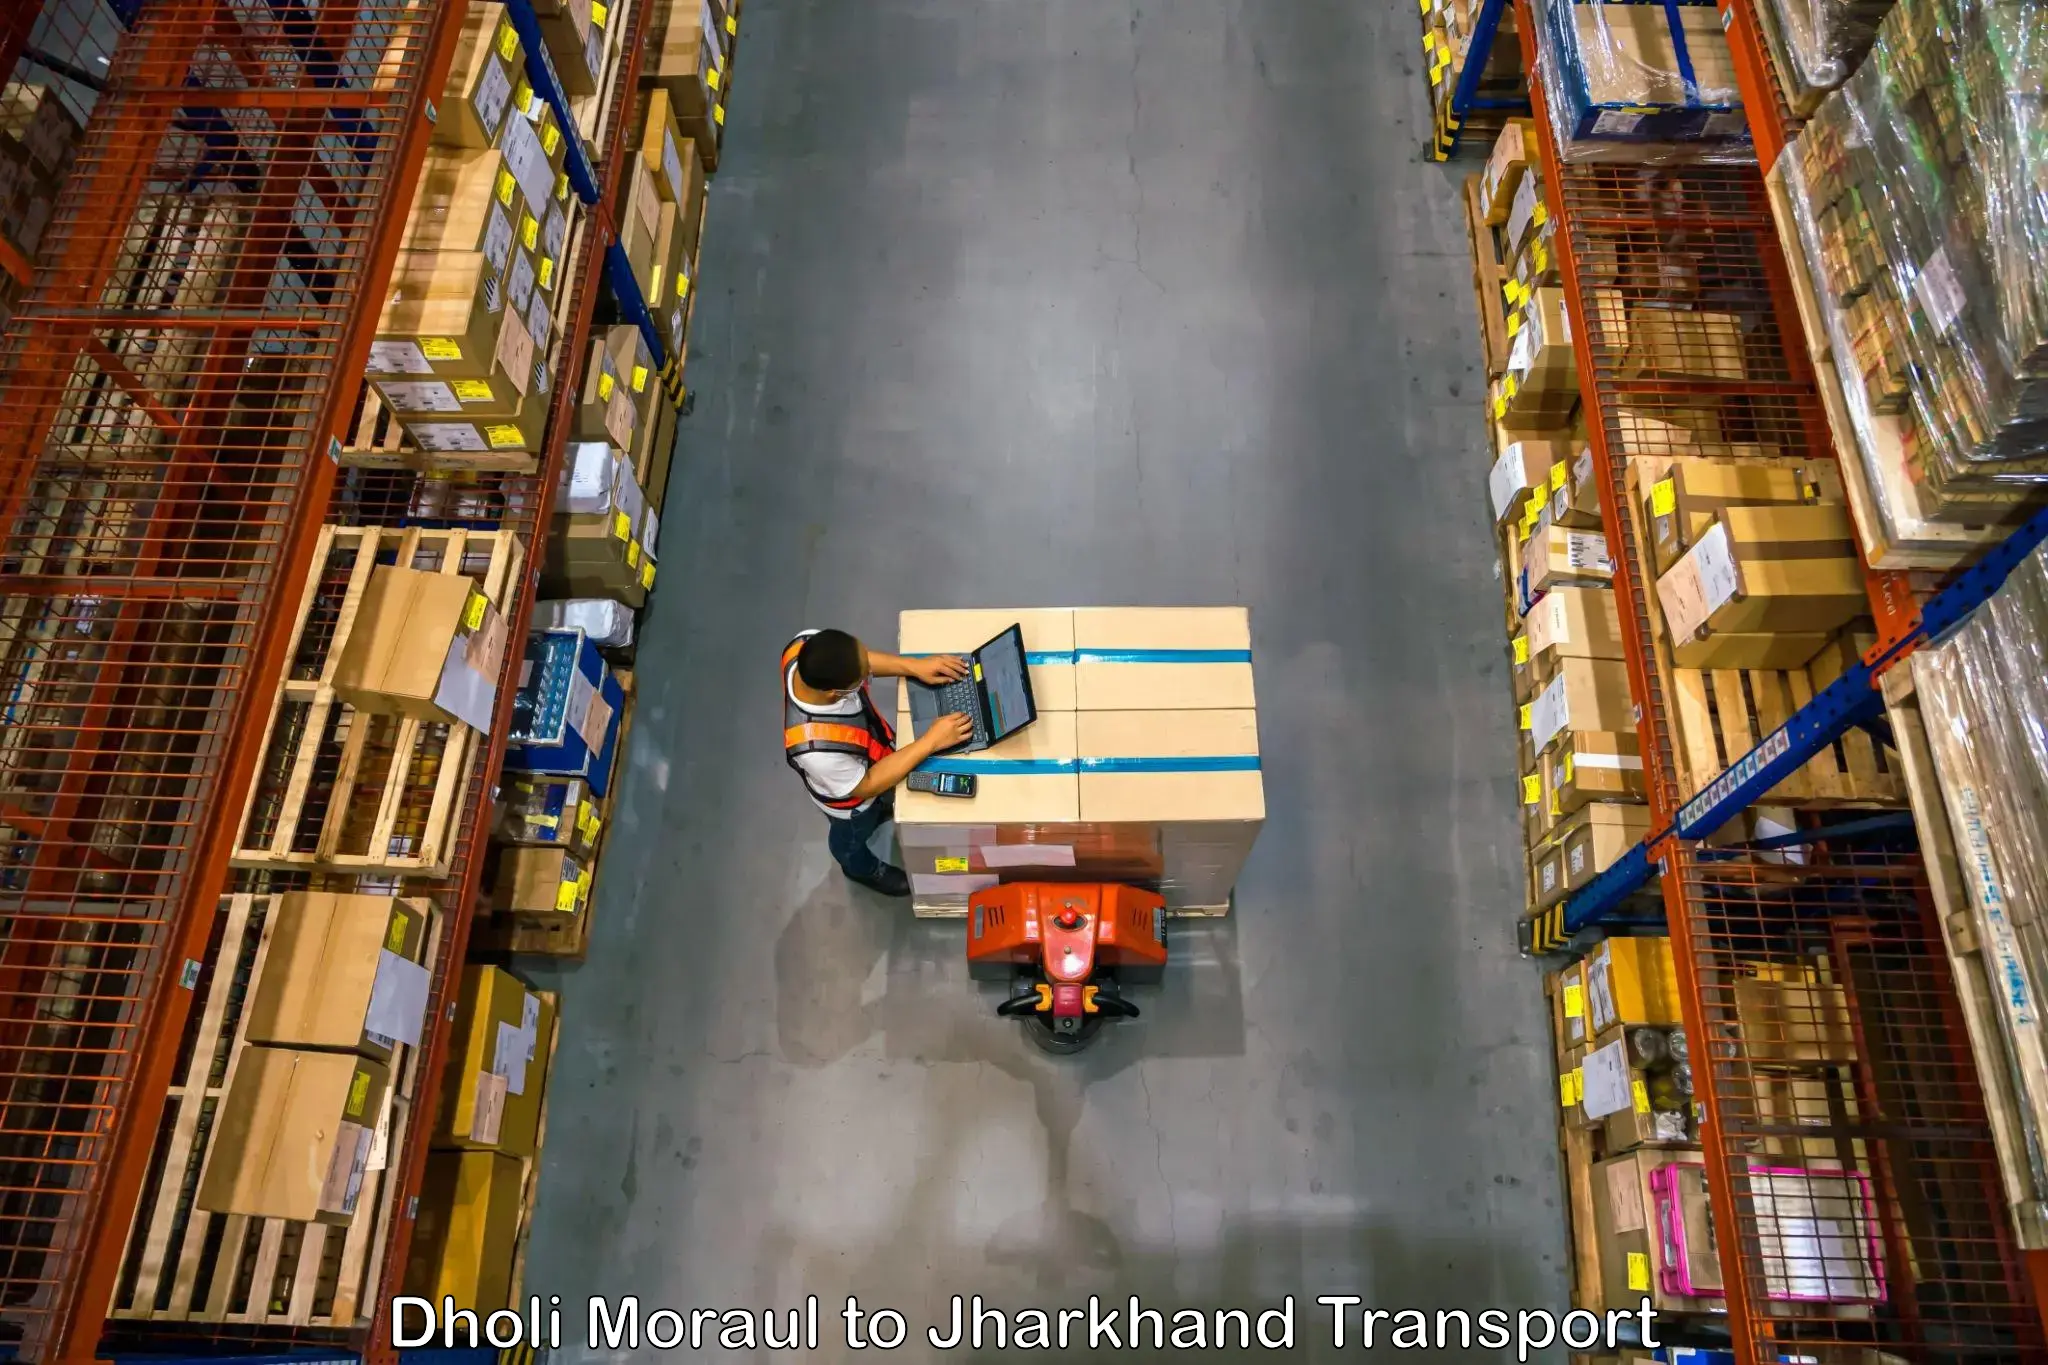 Truck transport companies in India in Dholi Moraul to Gomoh